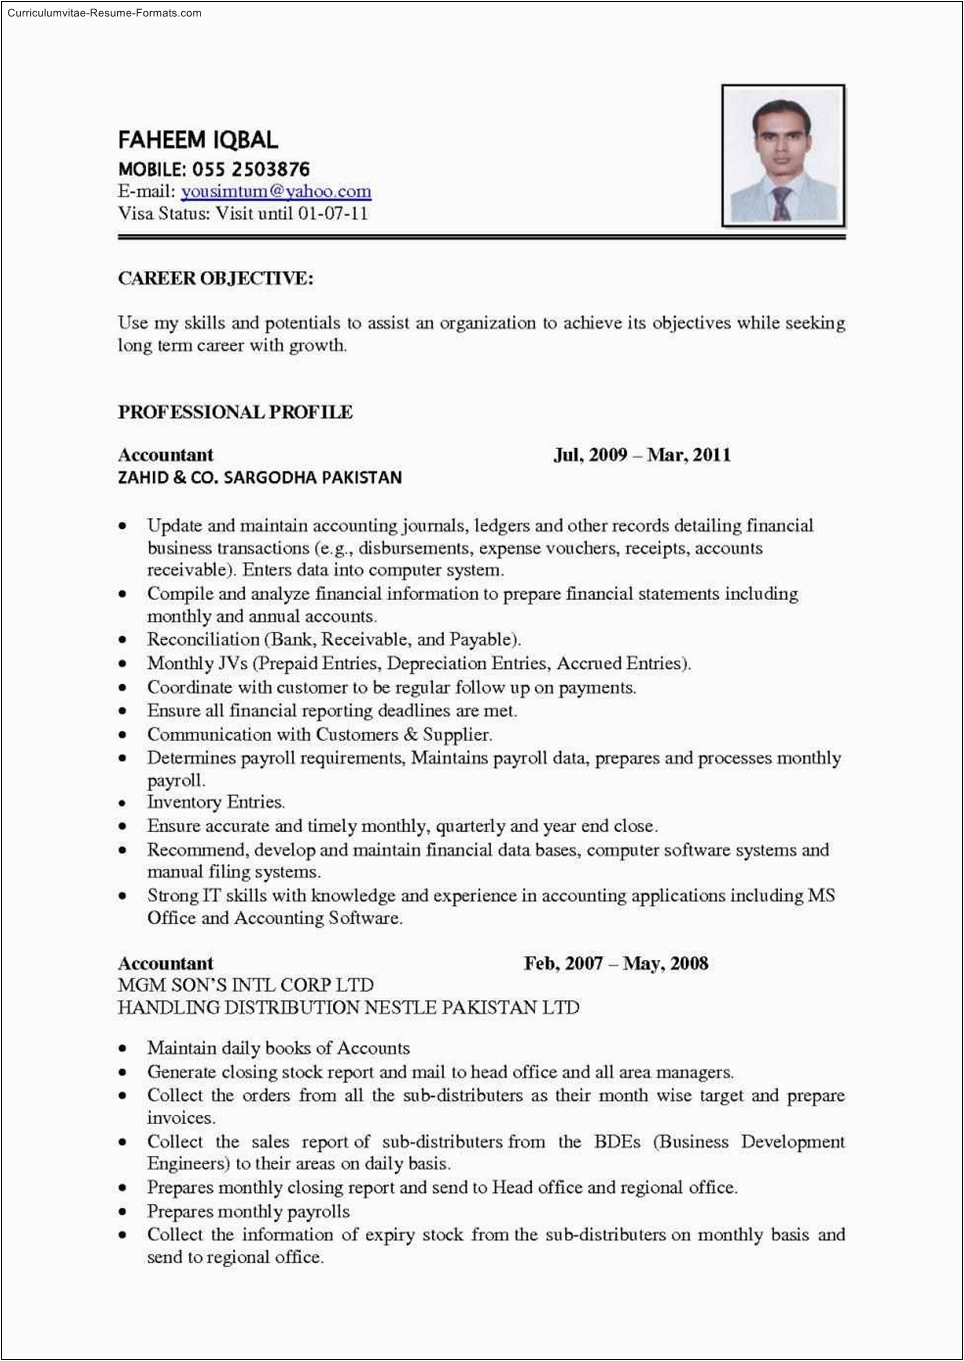 Best Template to Use for Resume Best Resume Template to Use